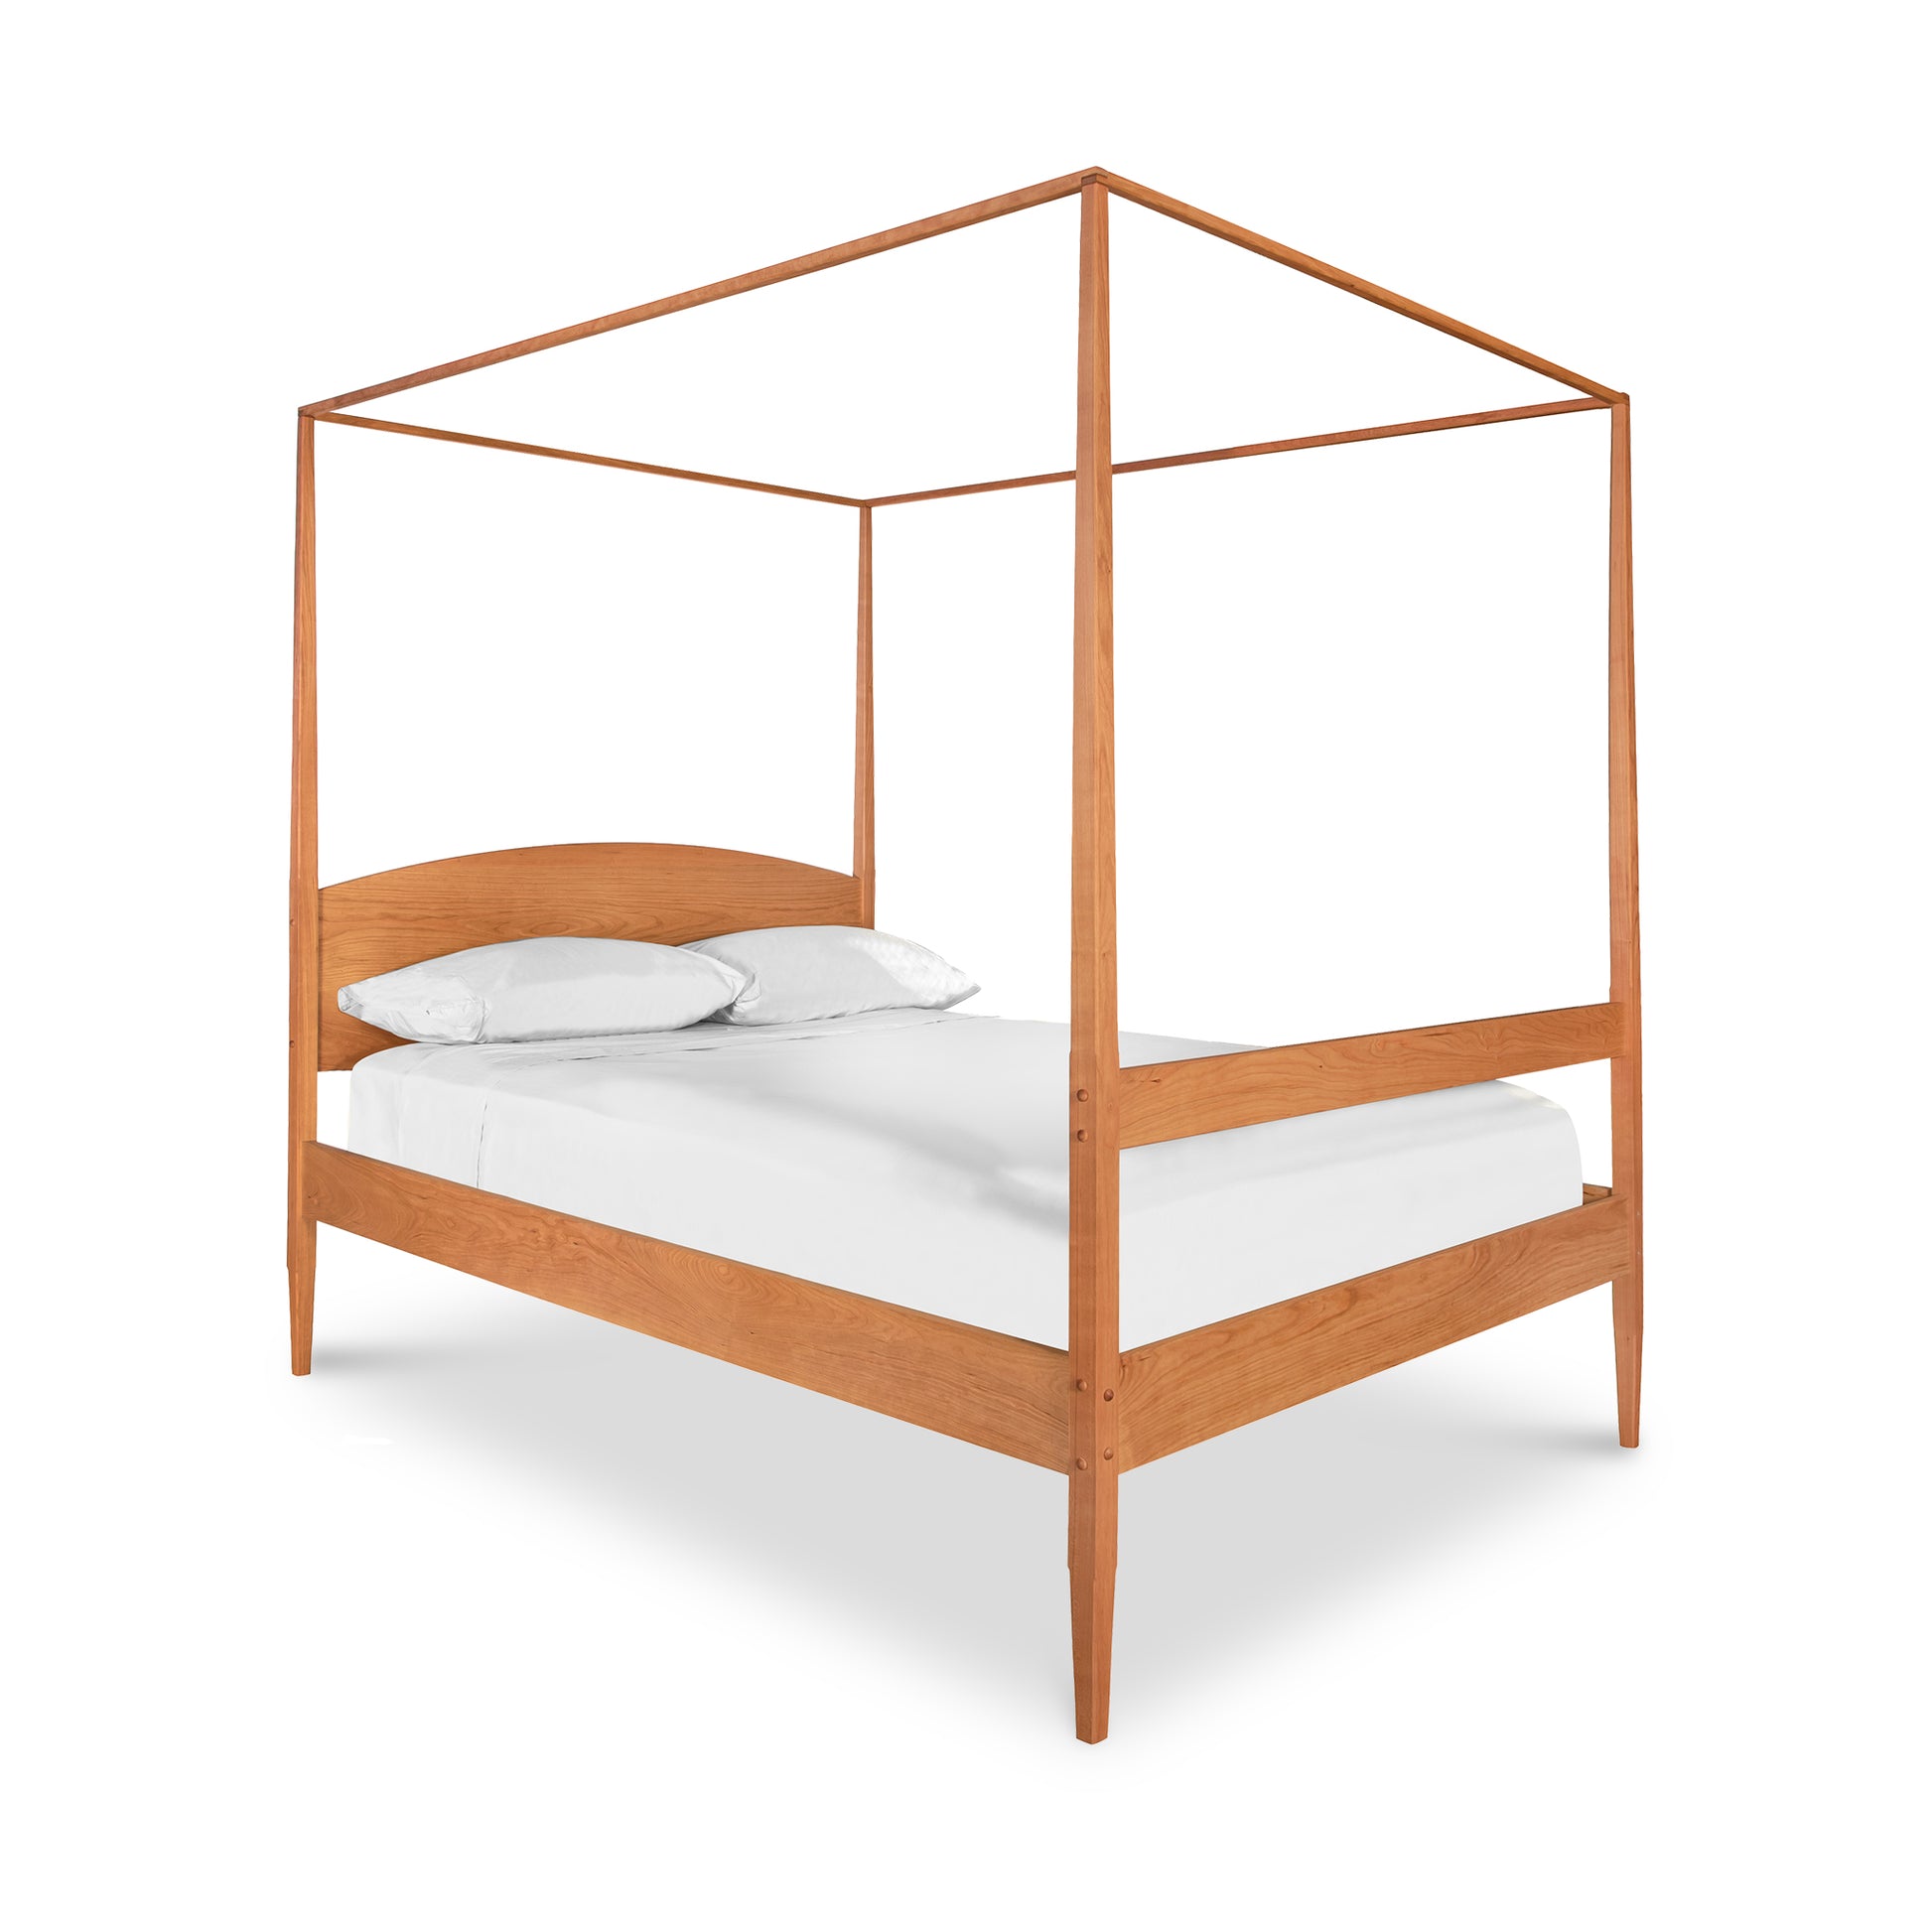 A wooden canopy bed with white sheets on it.